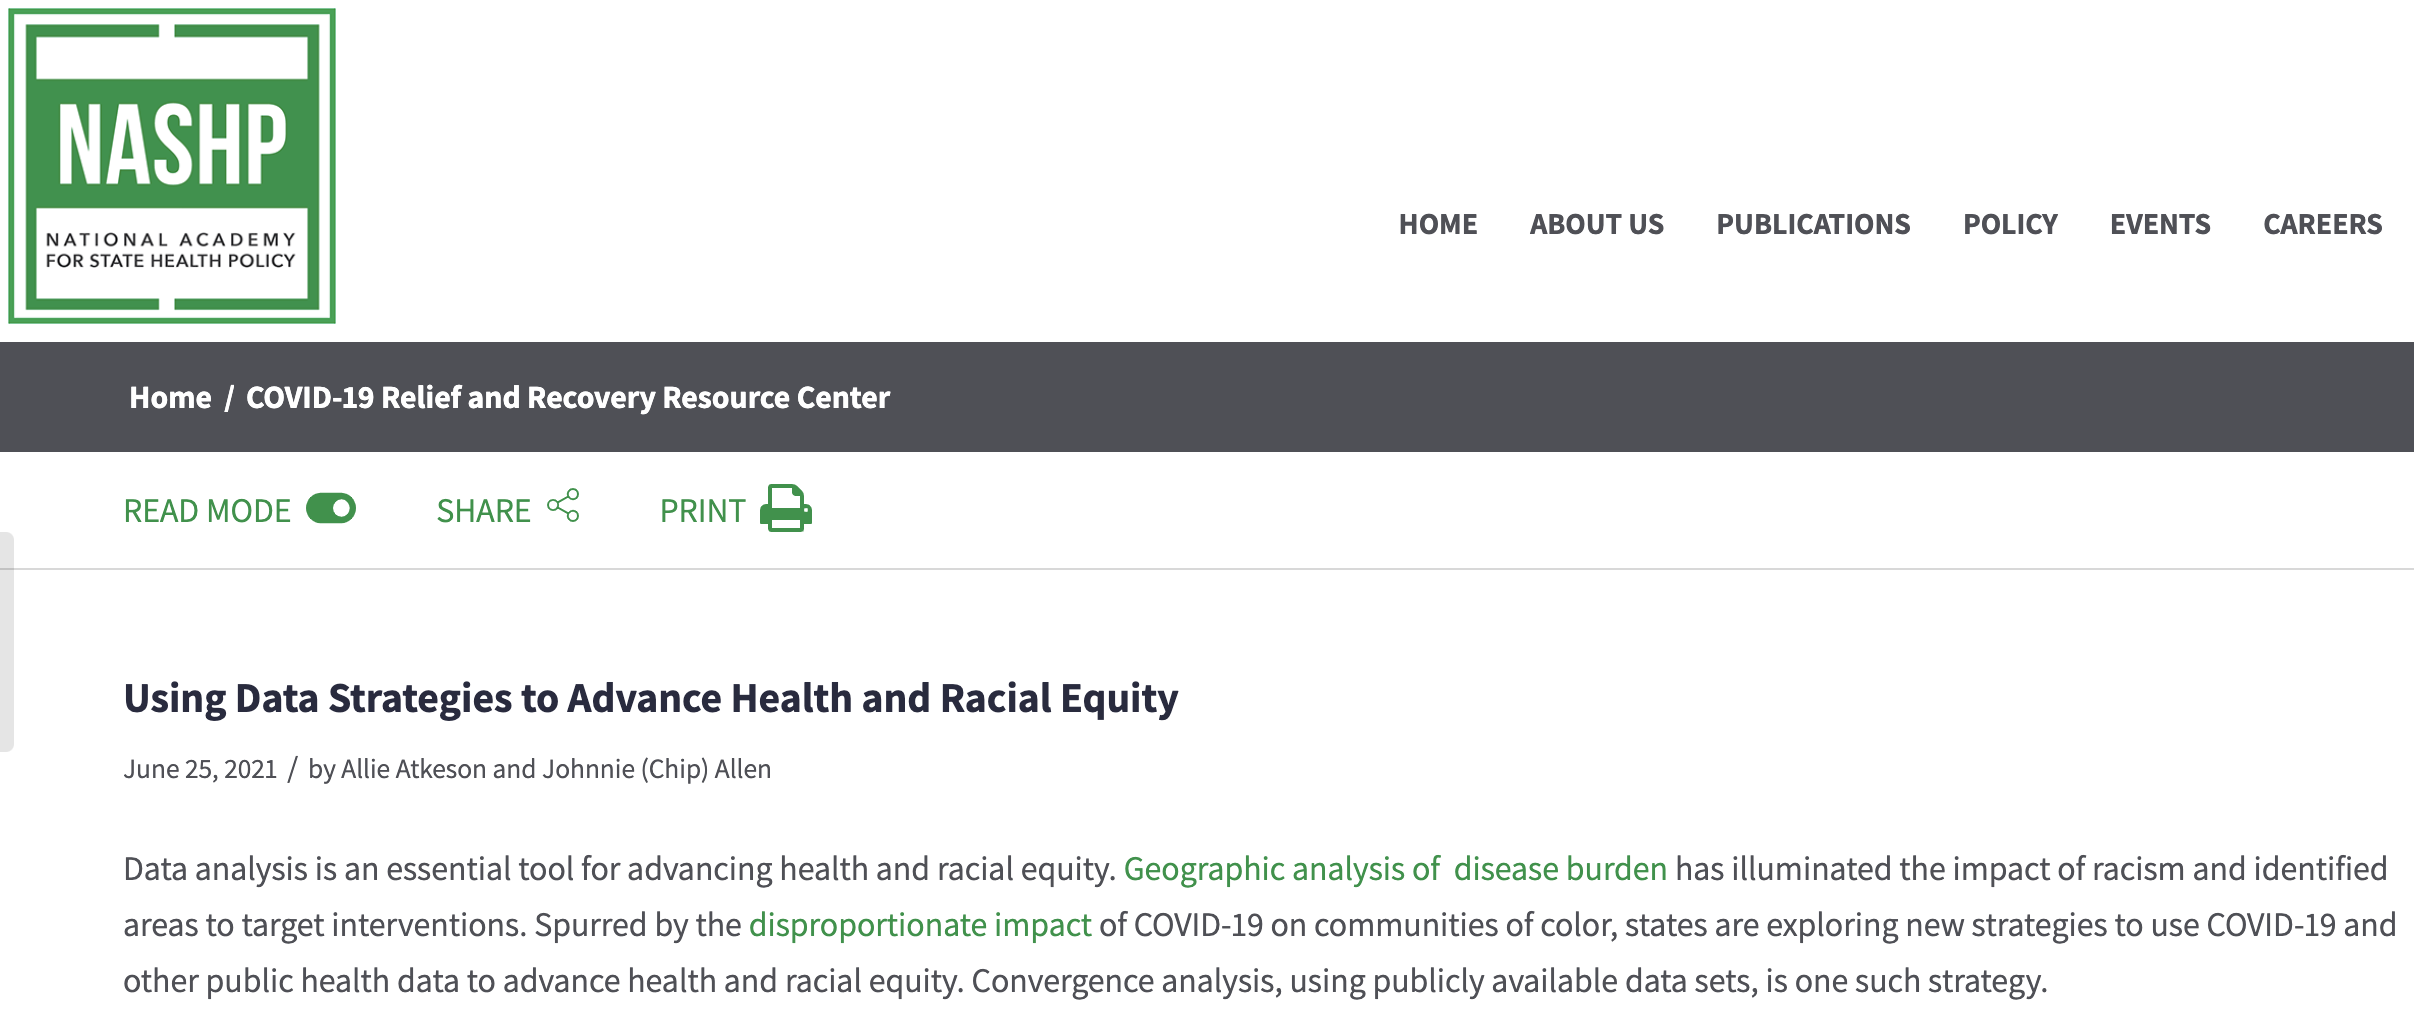 Using Data Strategies to Advance Health and Racial Equity